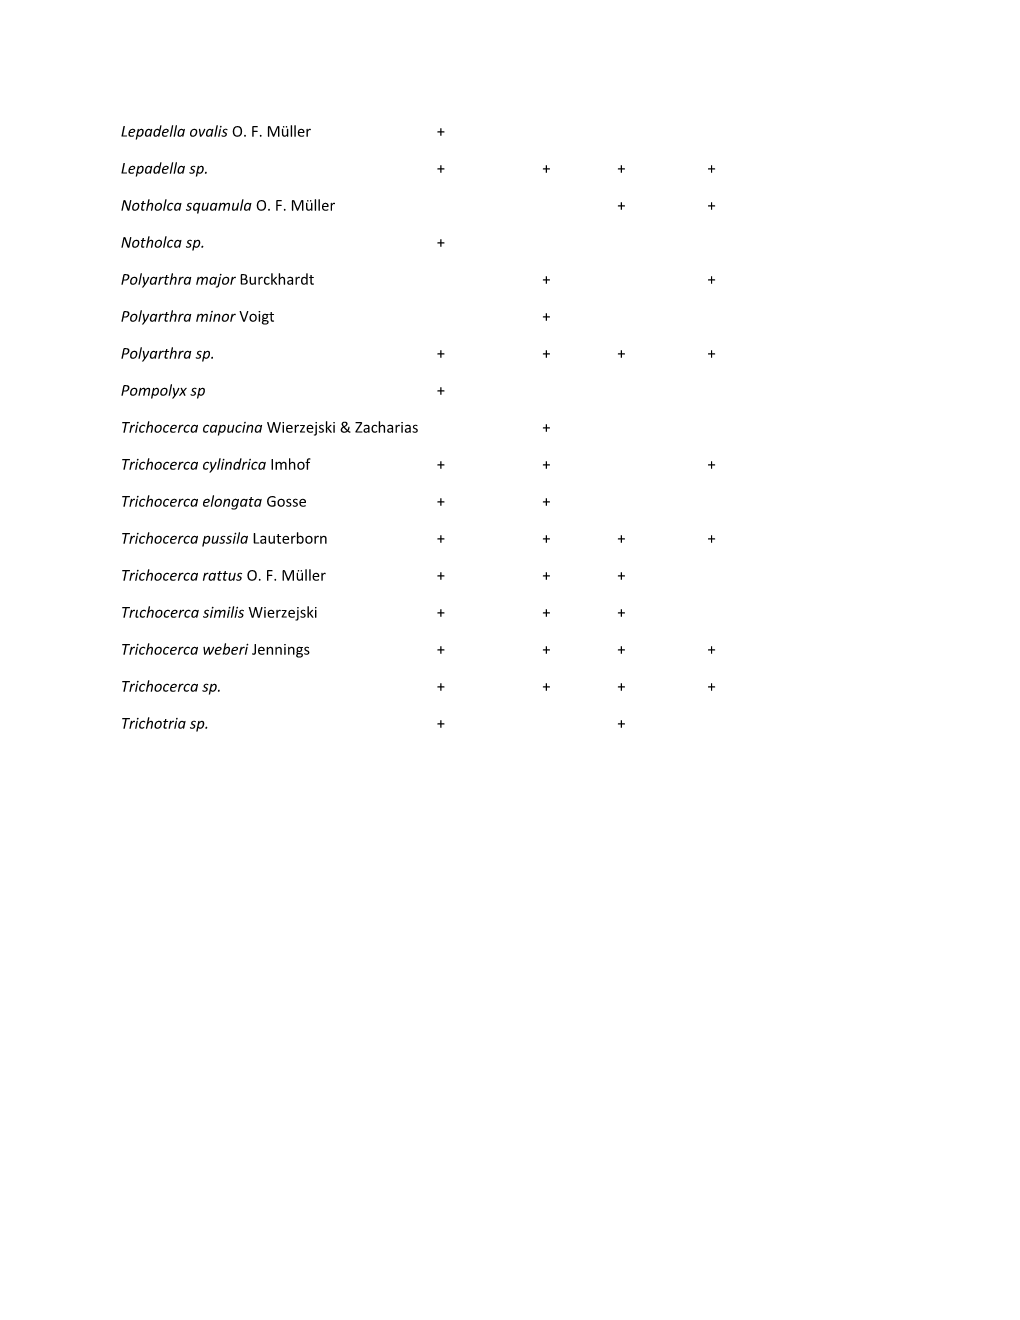 Appendix 2 List of Cladocera and Rotifera Species Found in the Studied Lakes